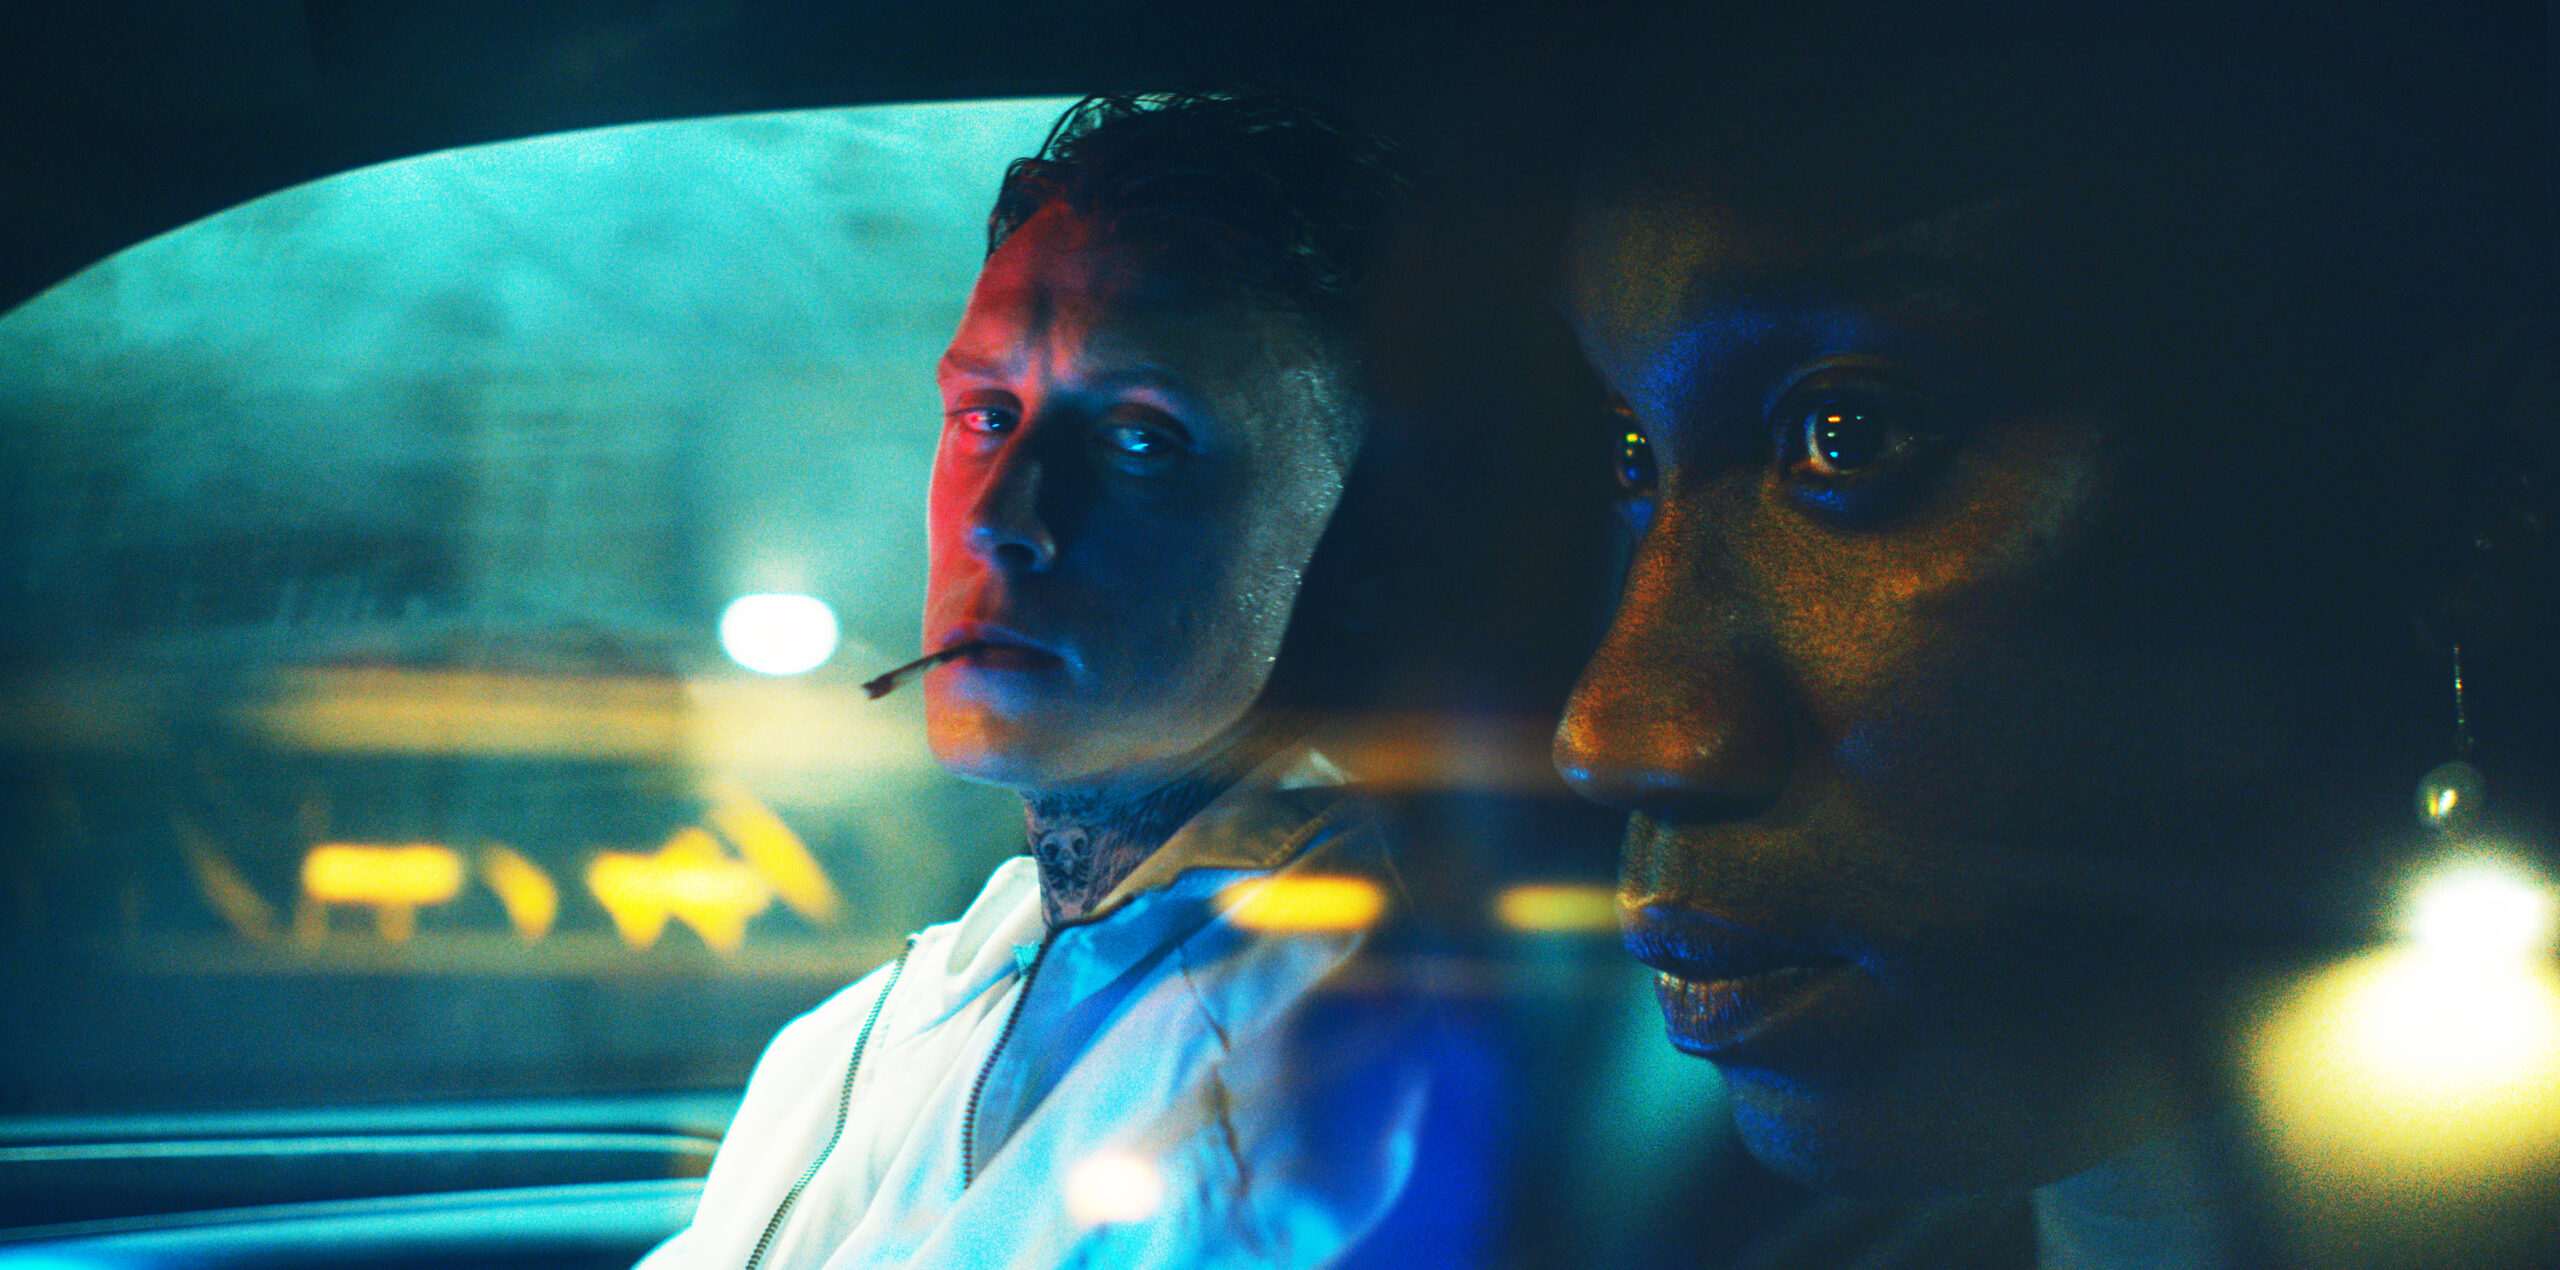 Two men sit in a car, bathed in neon lights – a white man with a cigarette in his mouth is looking at a black man, who looks out the window